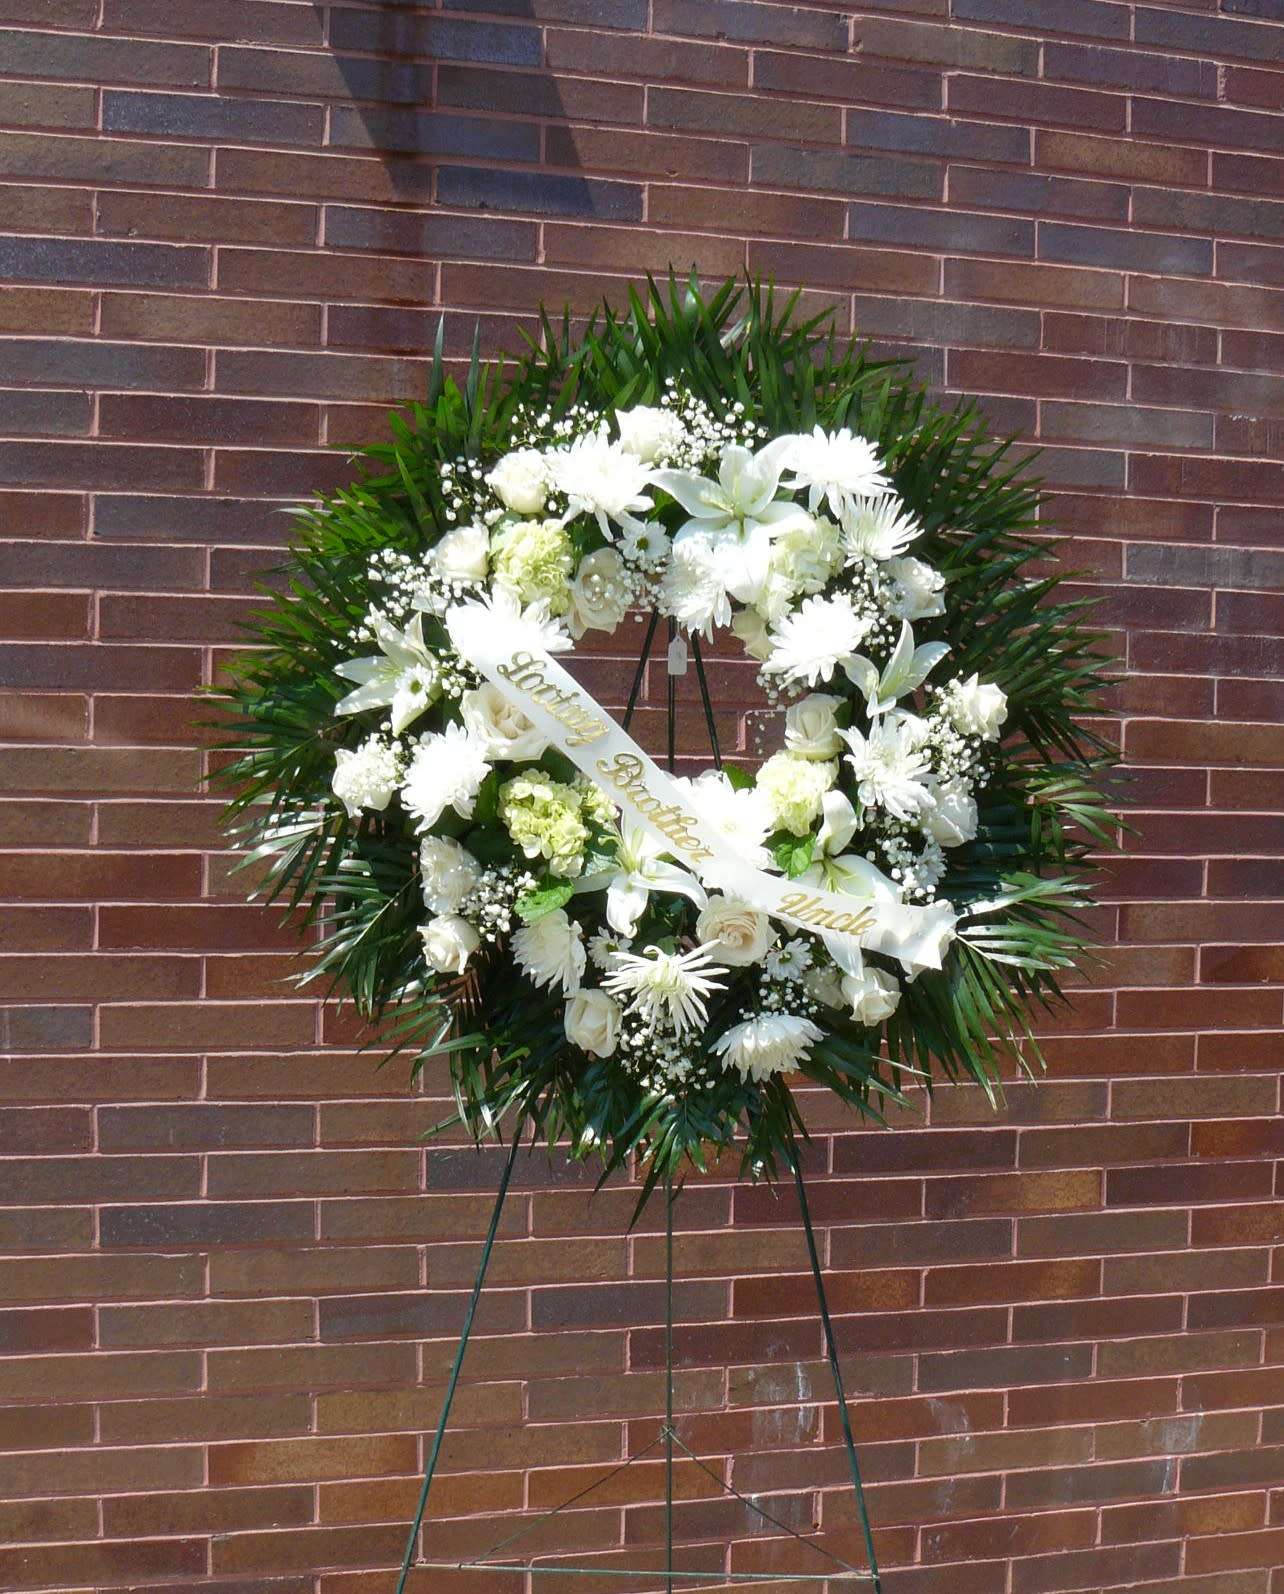 Blooms All White Wreath - White Roses, White Lilies, White Spider, White Hydrangea, Babies Breath, Fancy Greens